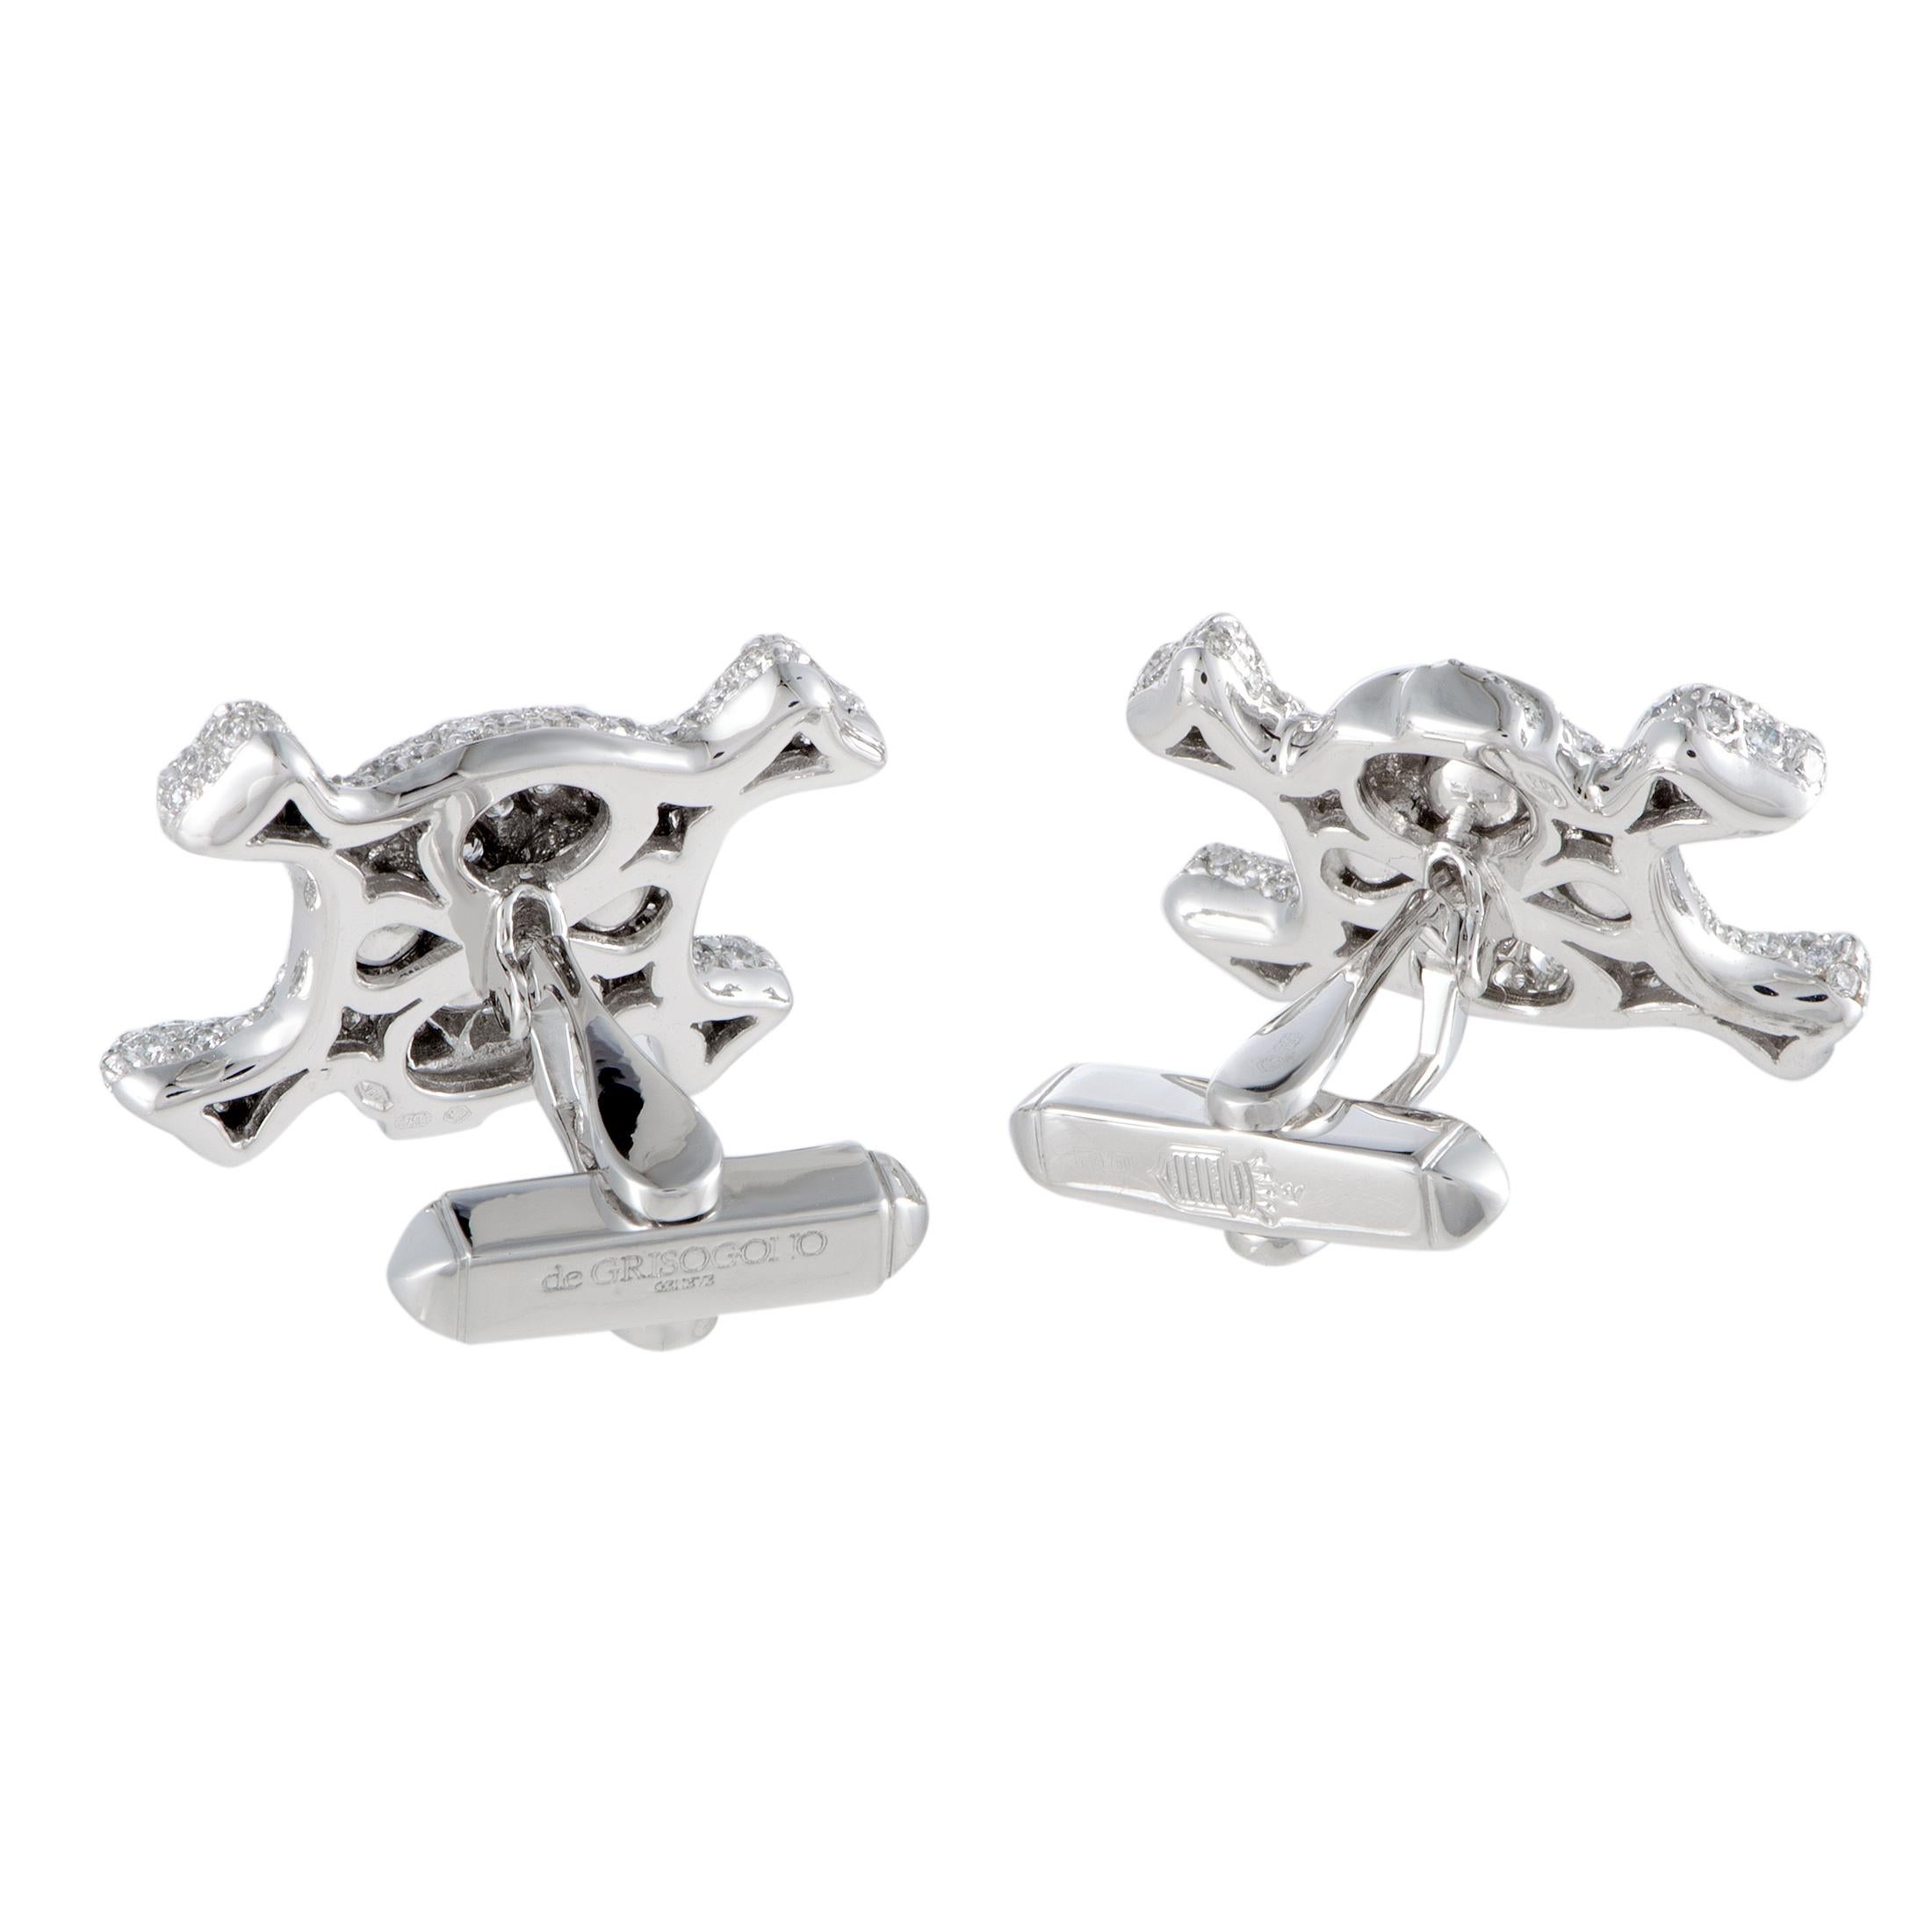 Designed in an exceptionally offbeat manner and luxuriously decorated with a plethora of dazzling gems, these exquisite cufflinks will accentuate your attire in a remarkably attractive fashion. The cufflinks are presented by de Grisogono and the